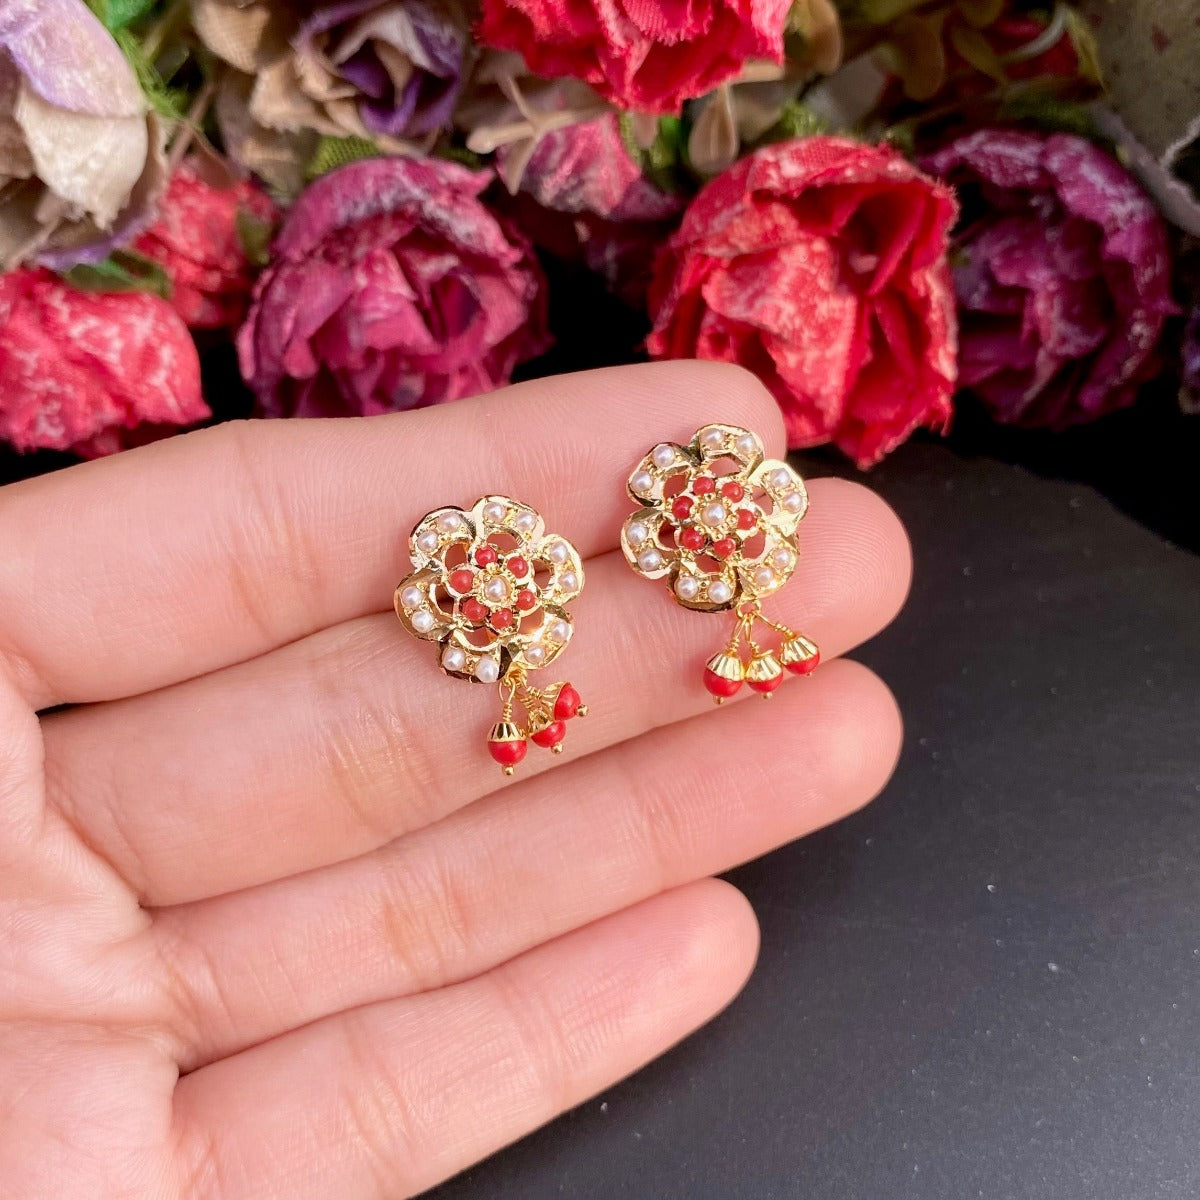 22k gold earrings studded with coral and pearls